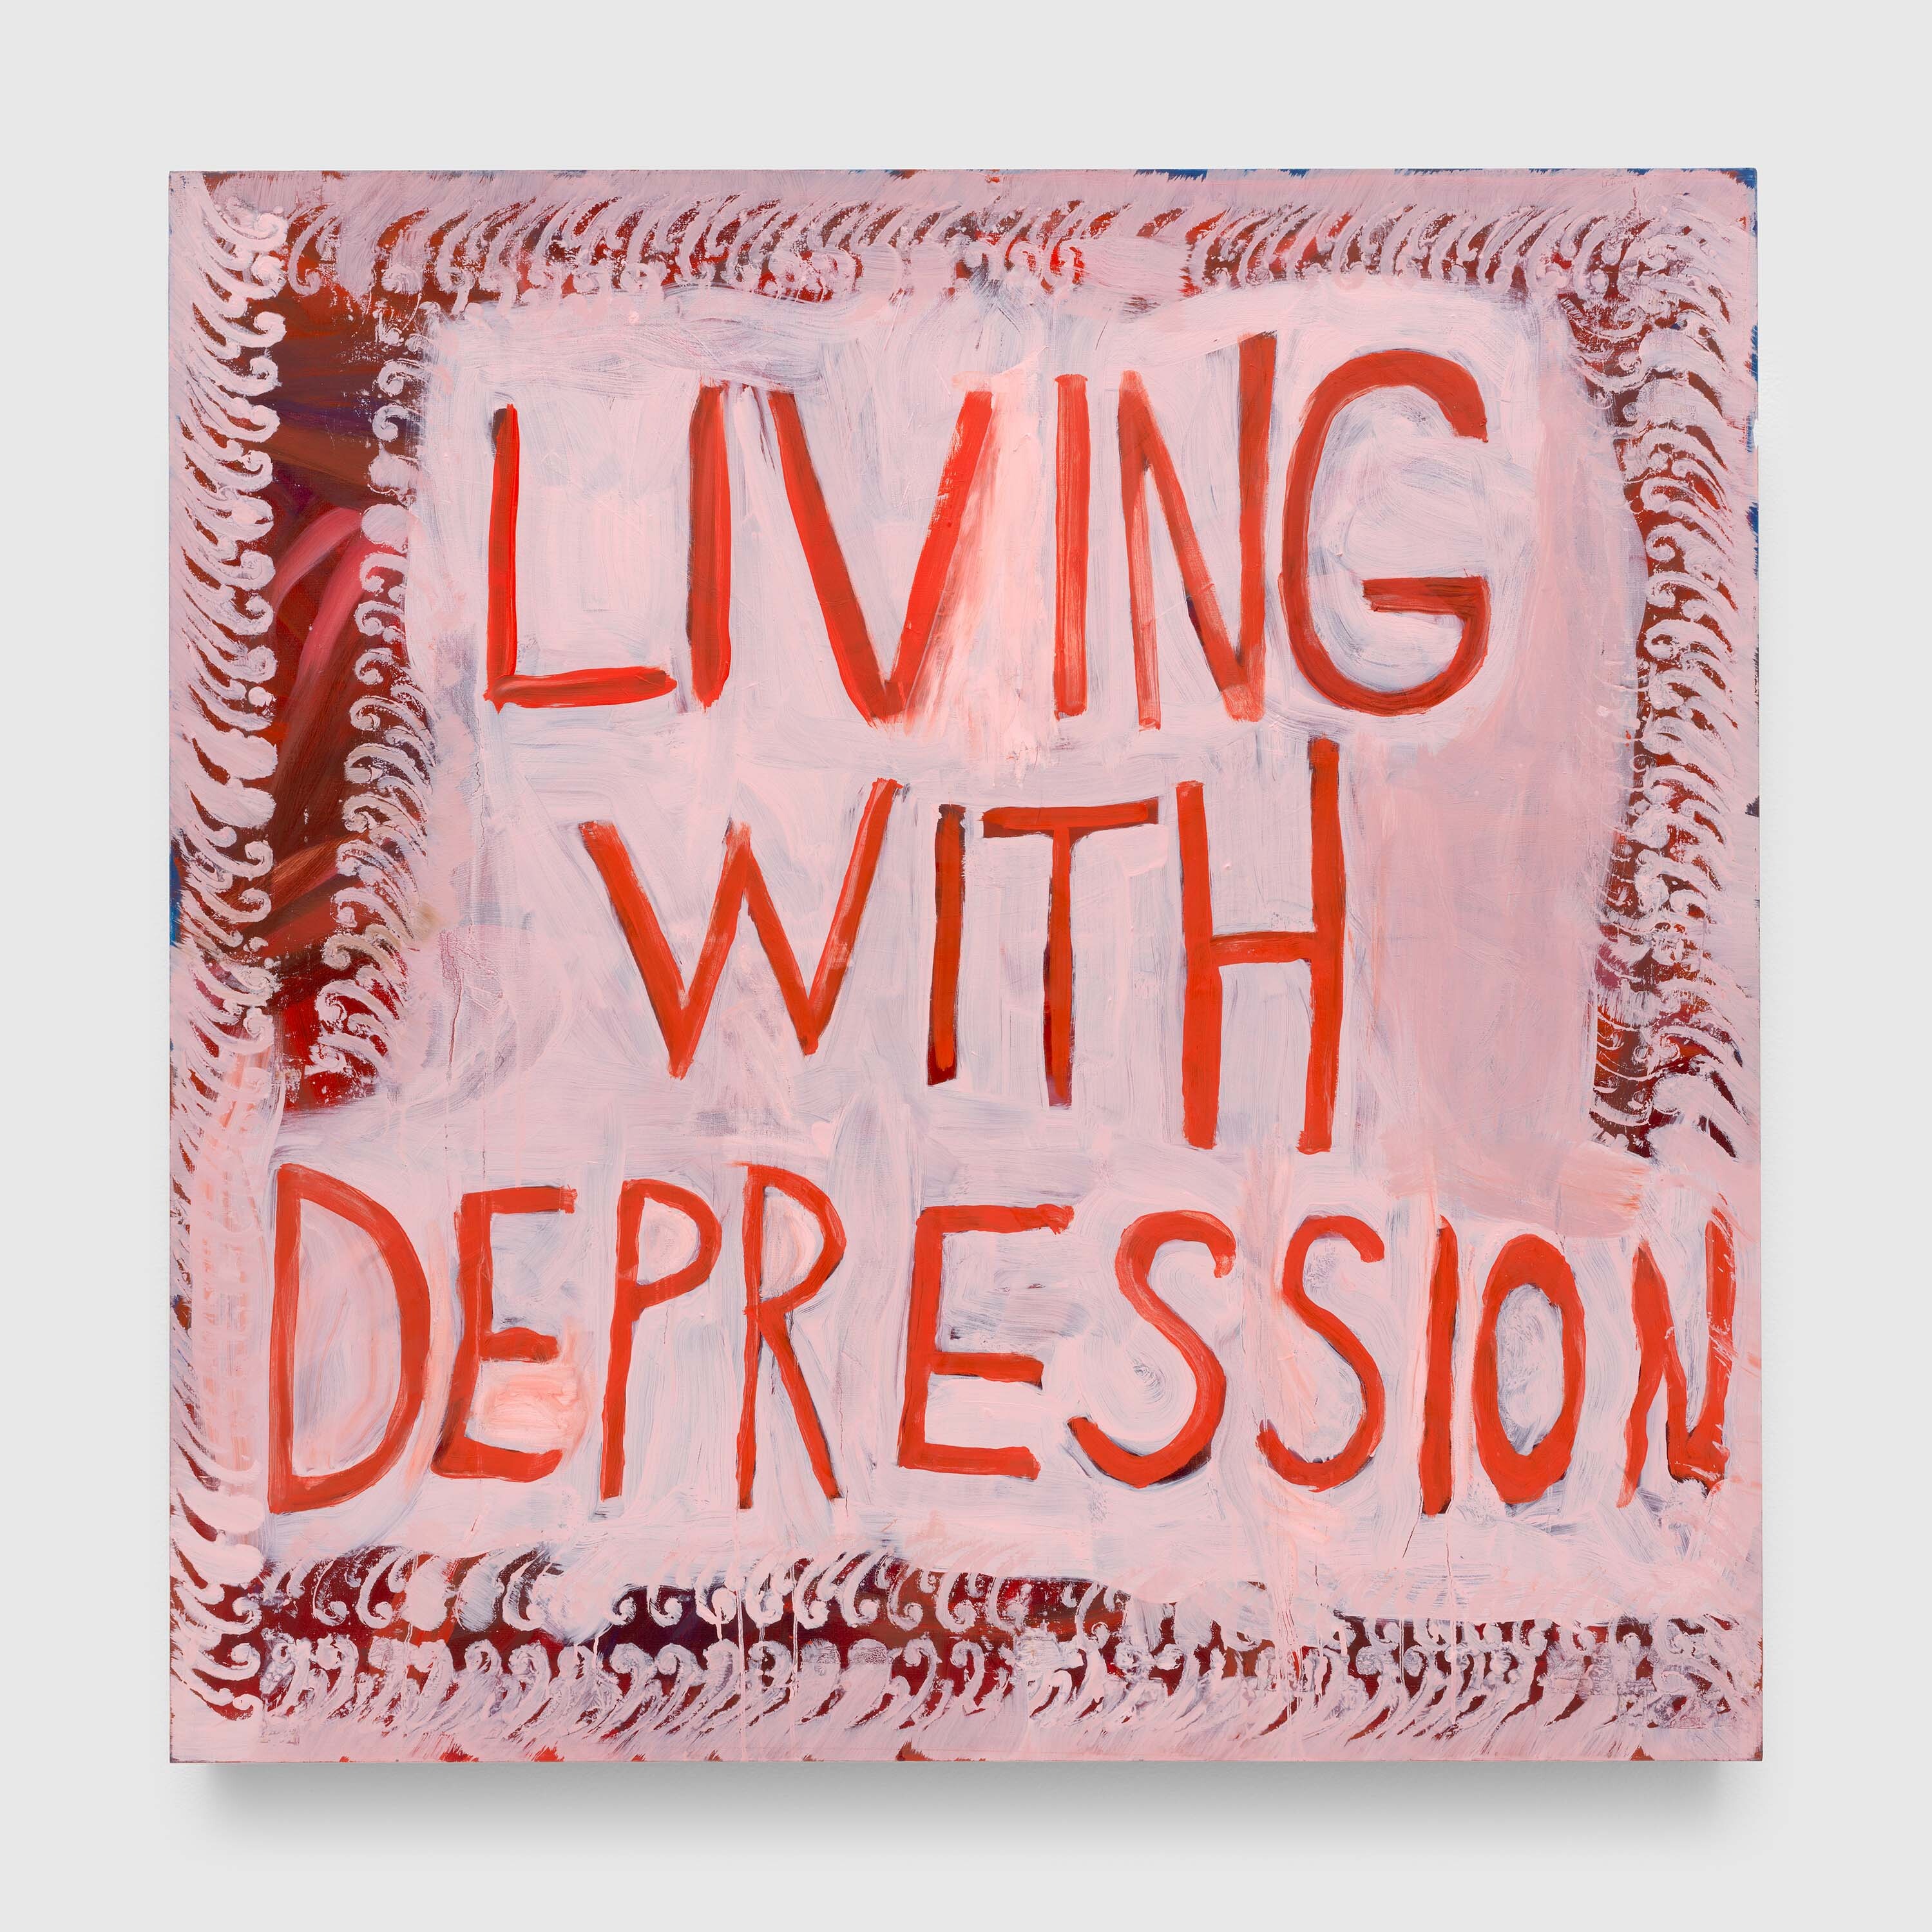 👂 Insights from Josh Smith on the 27 new paintings on view in Josh Smith:  Living with Depression at #DavidZwirnerParis. Don't miss your…